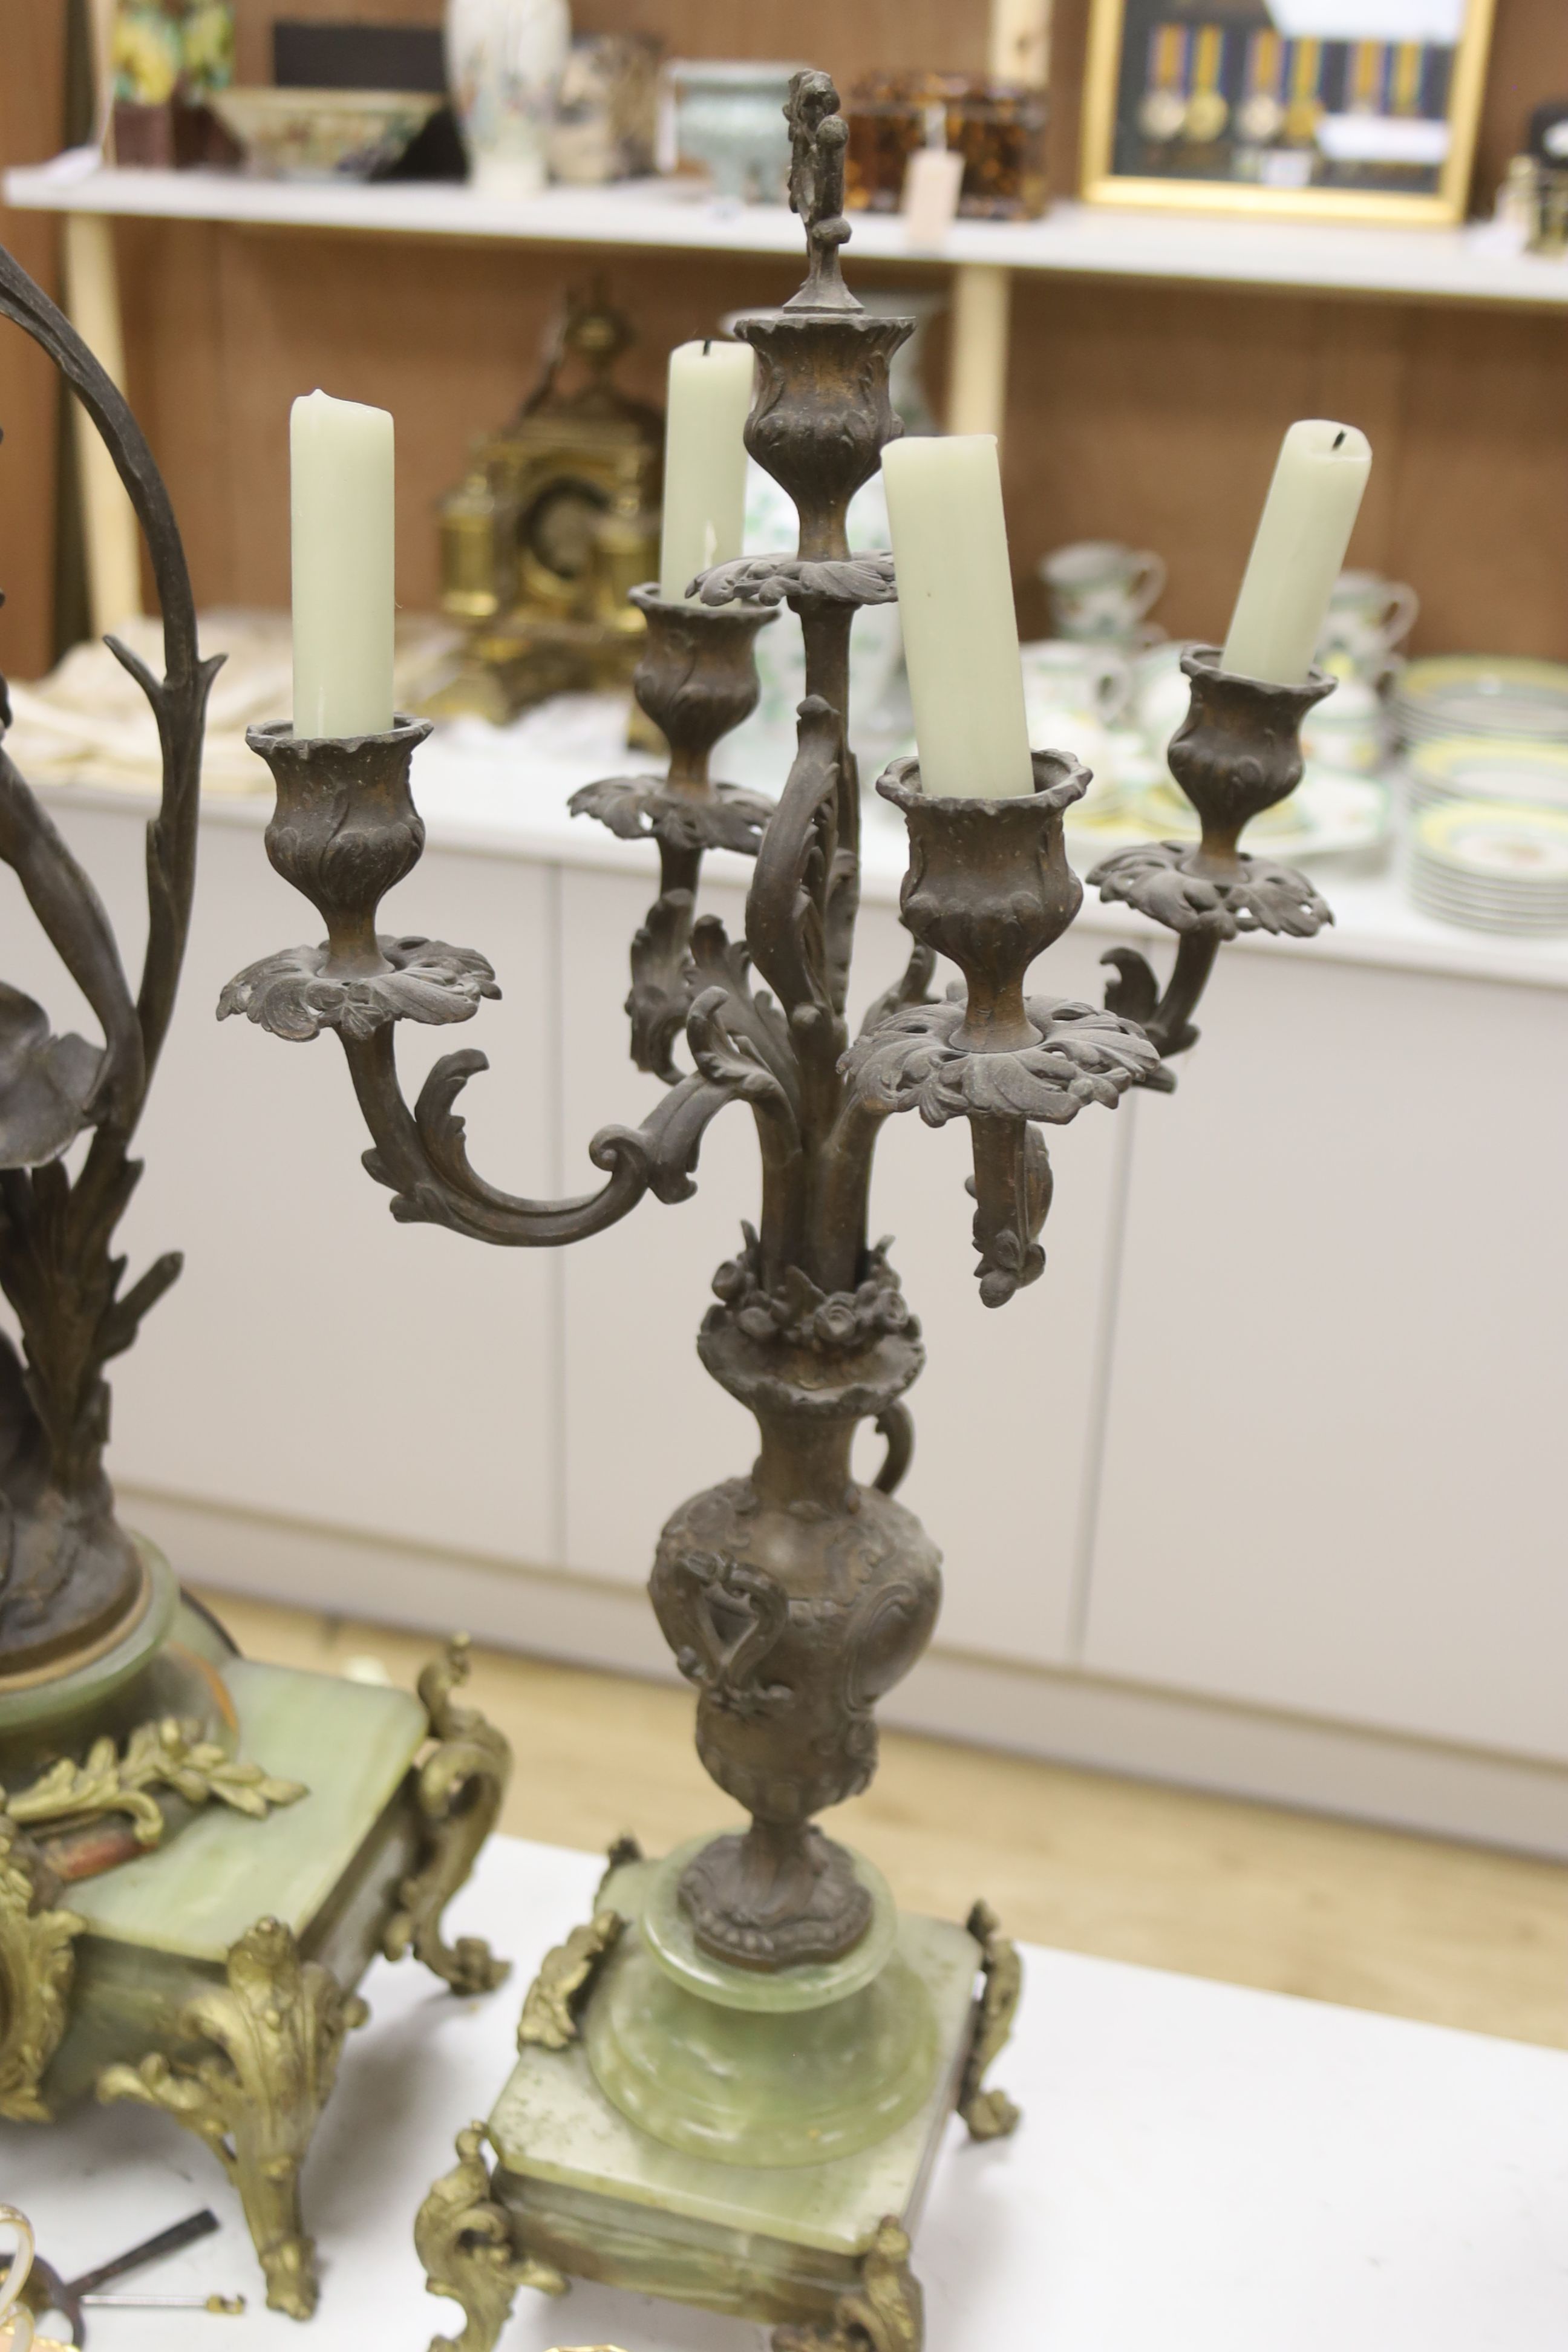 A 19th century French spelter and onyx clock garniture, height 61cm